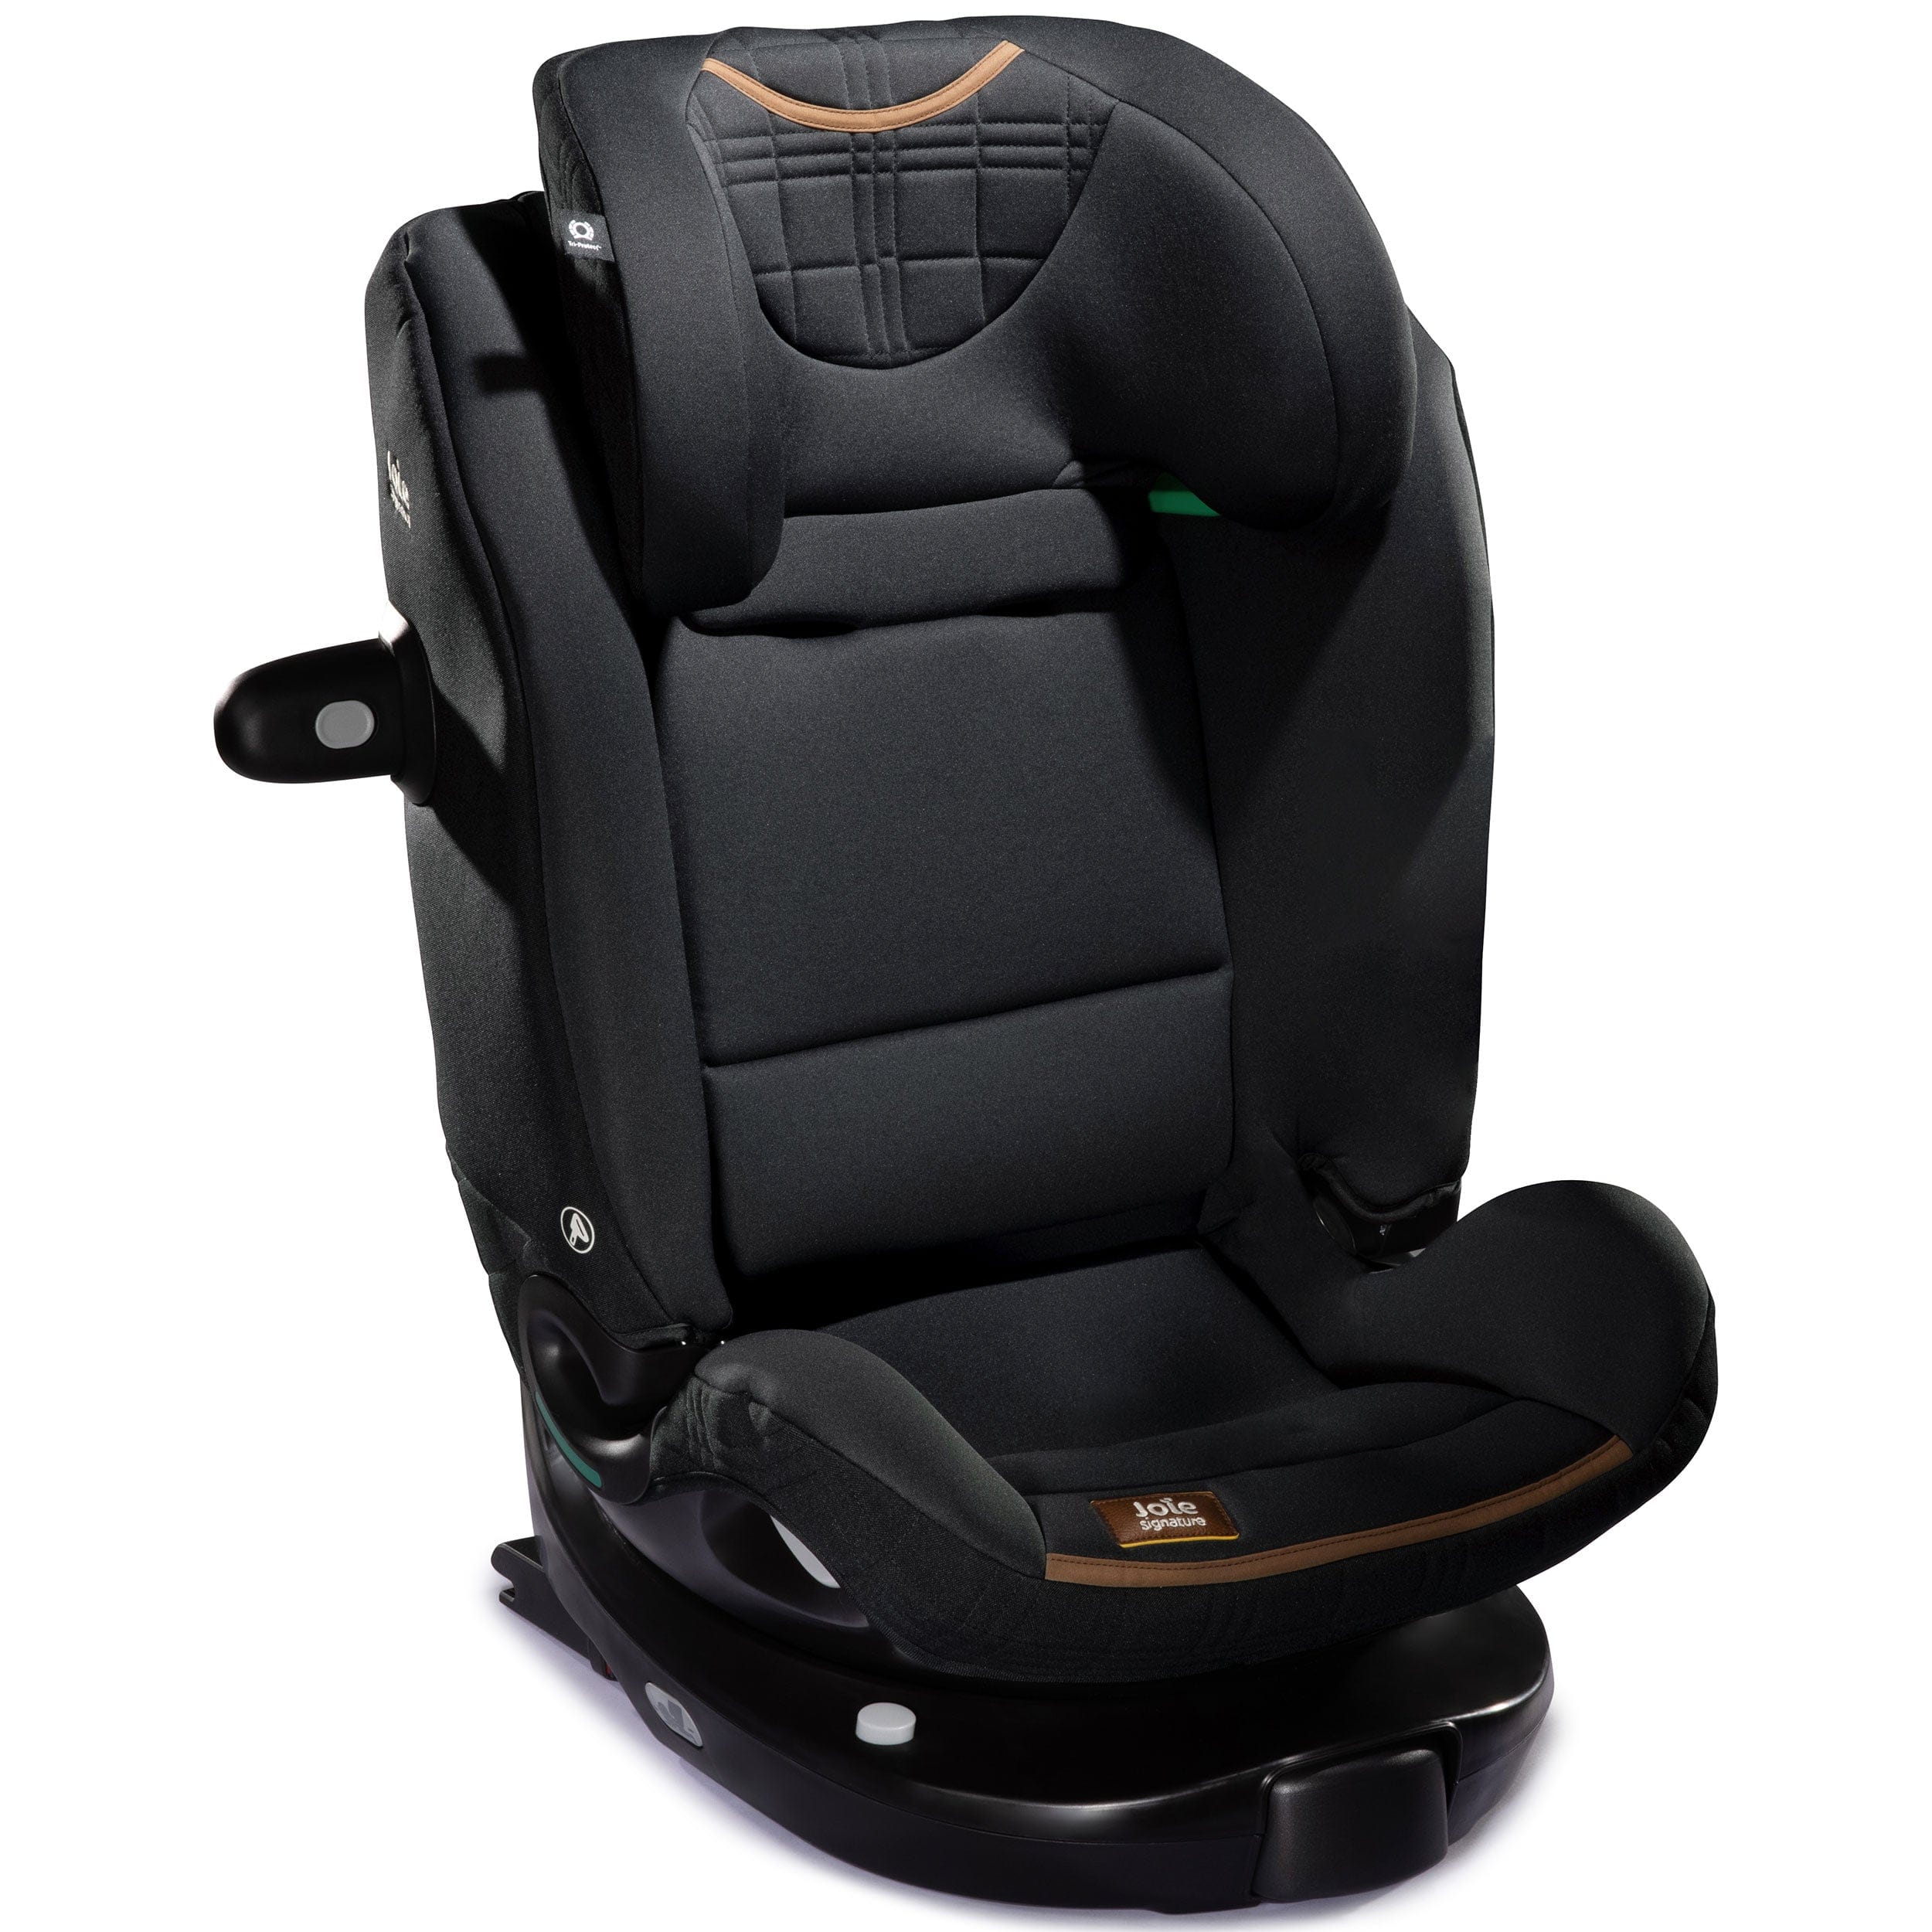 Joie combination car seats Joie i-Spin XL - Eclipse C2205AAECL000